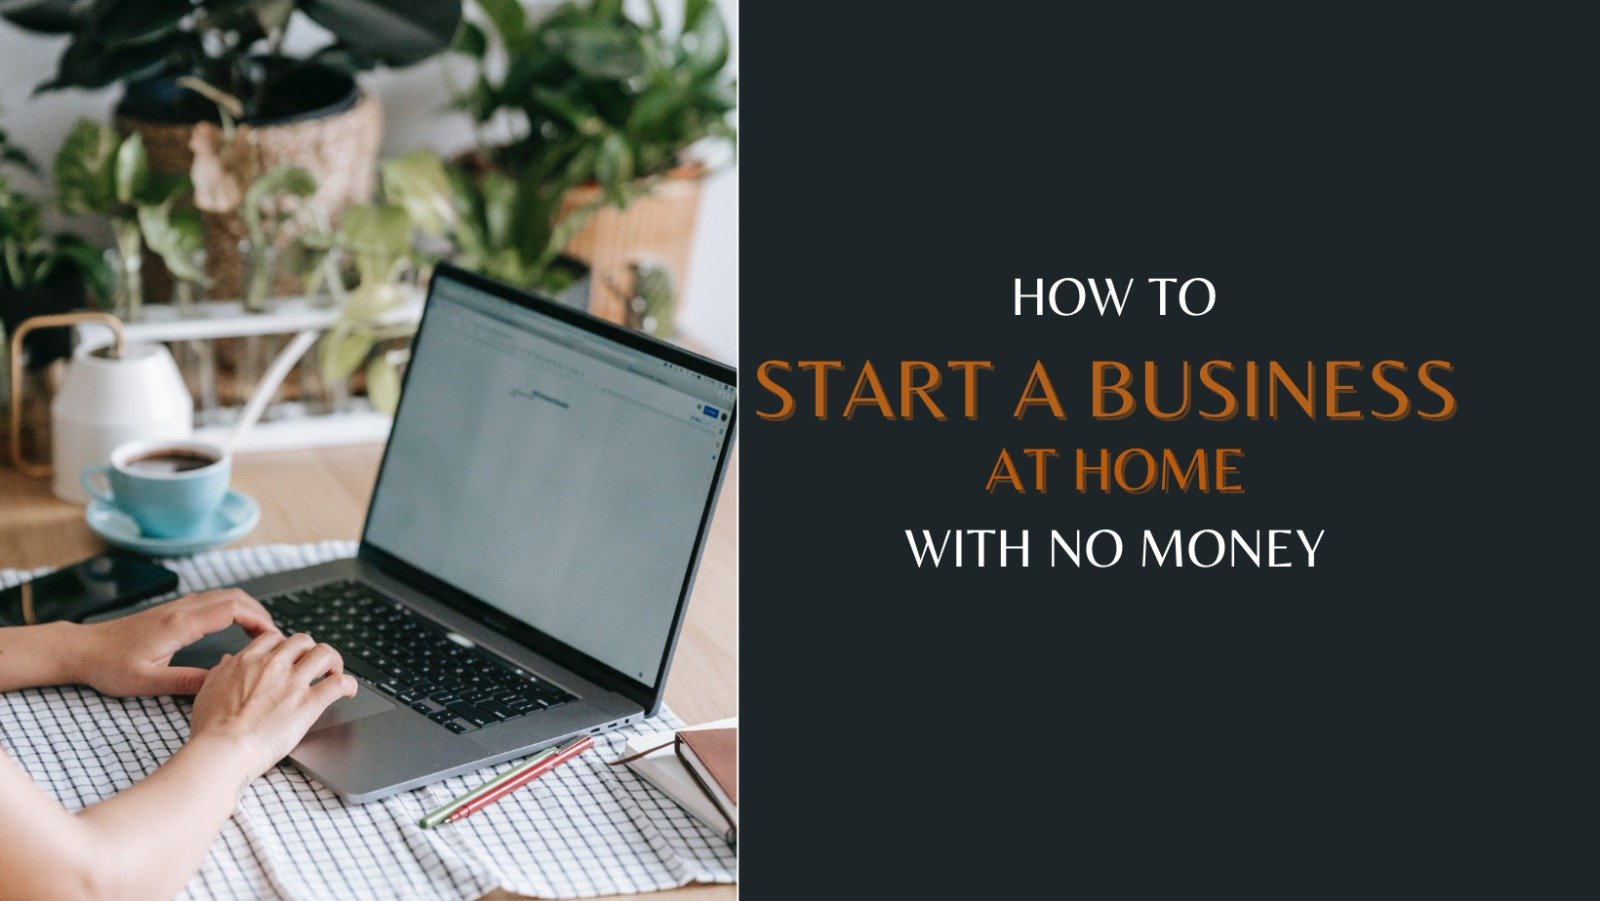 How to start a business at home with no money